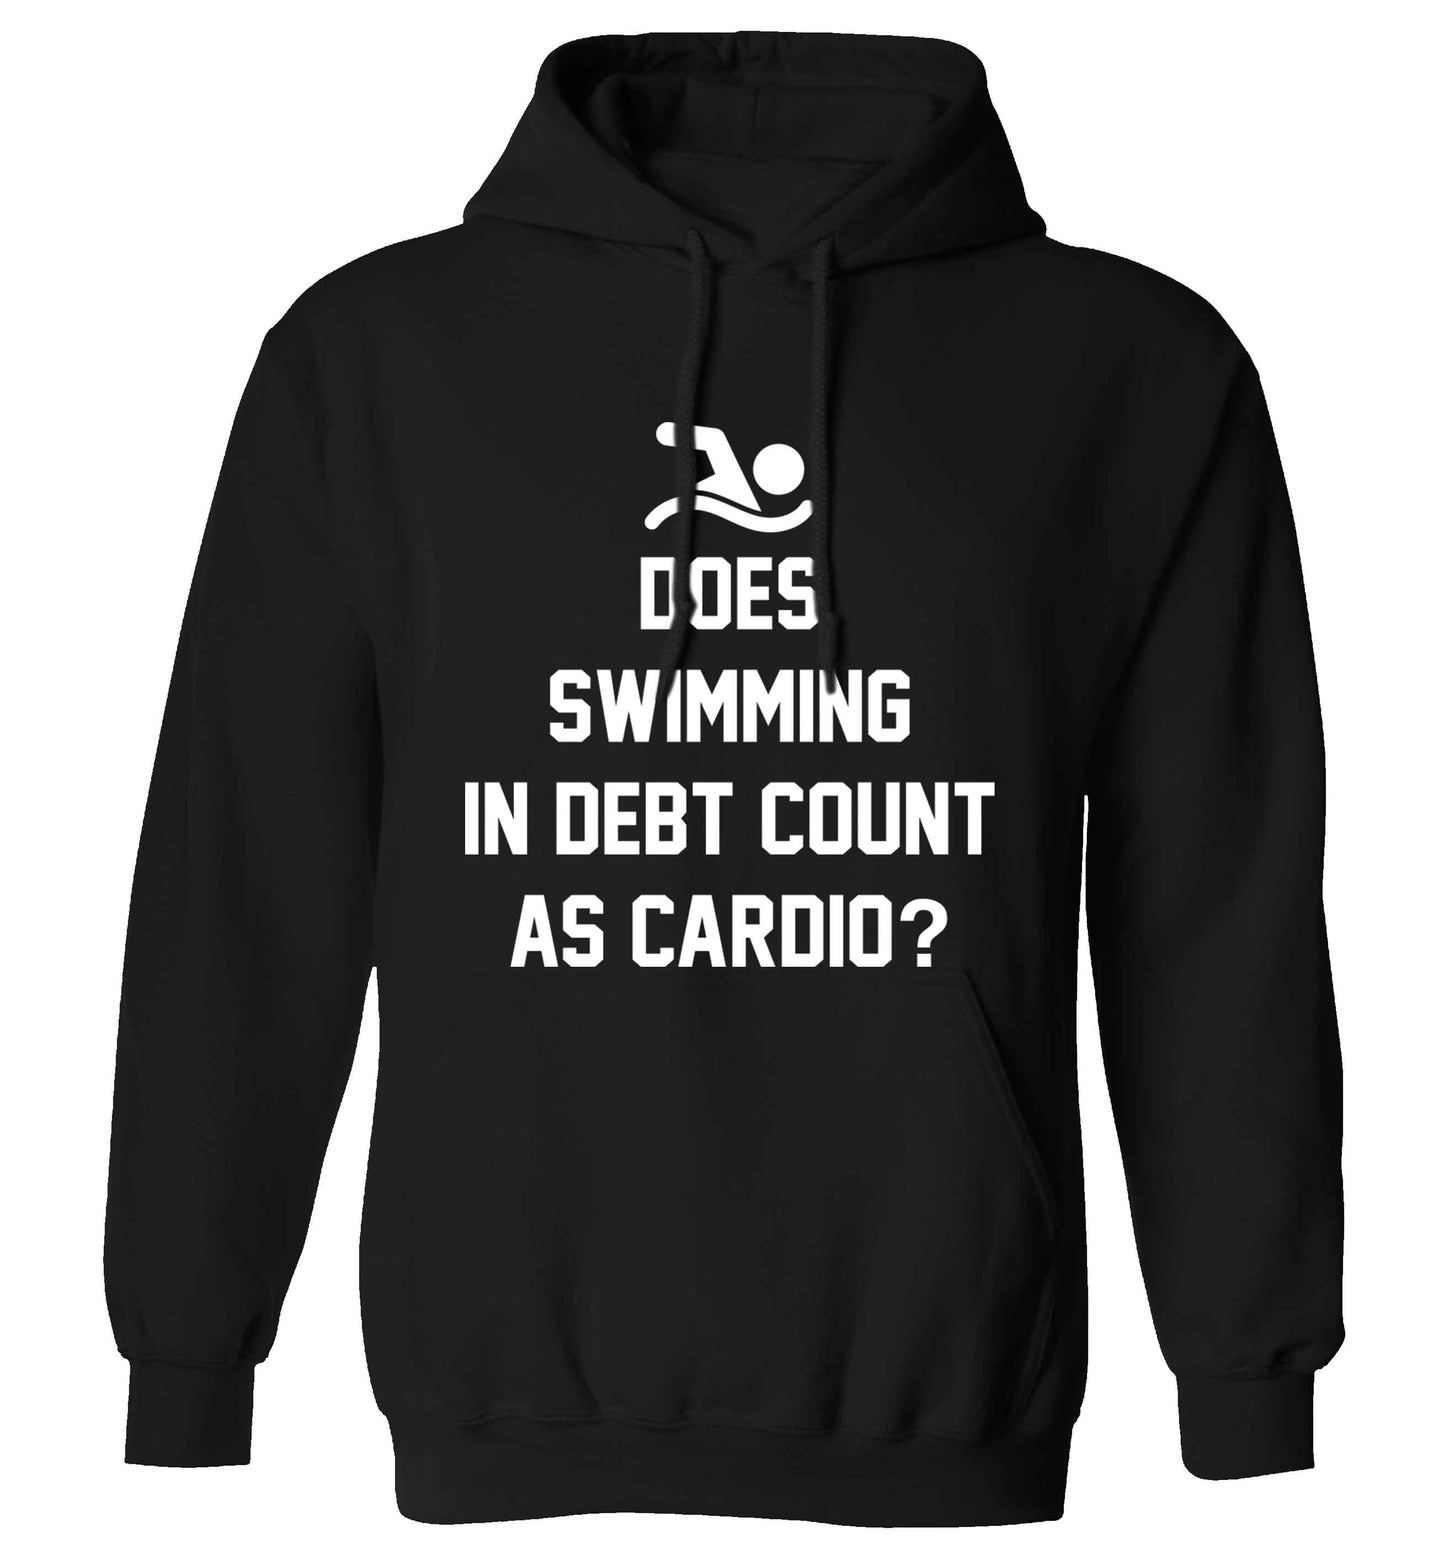 Does swimming in debt count as cardio? adults unisex black hoodie 2XL